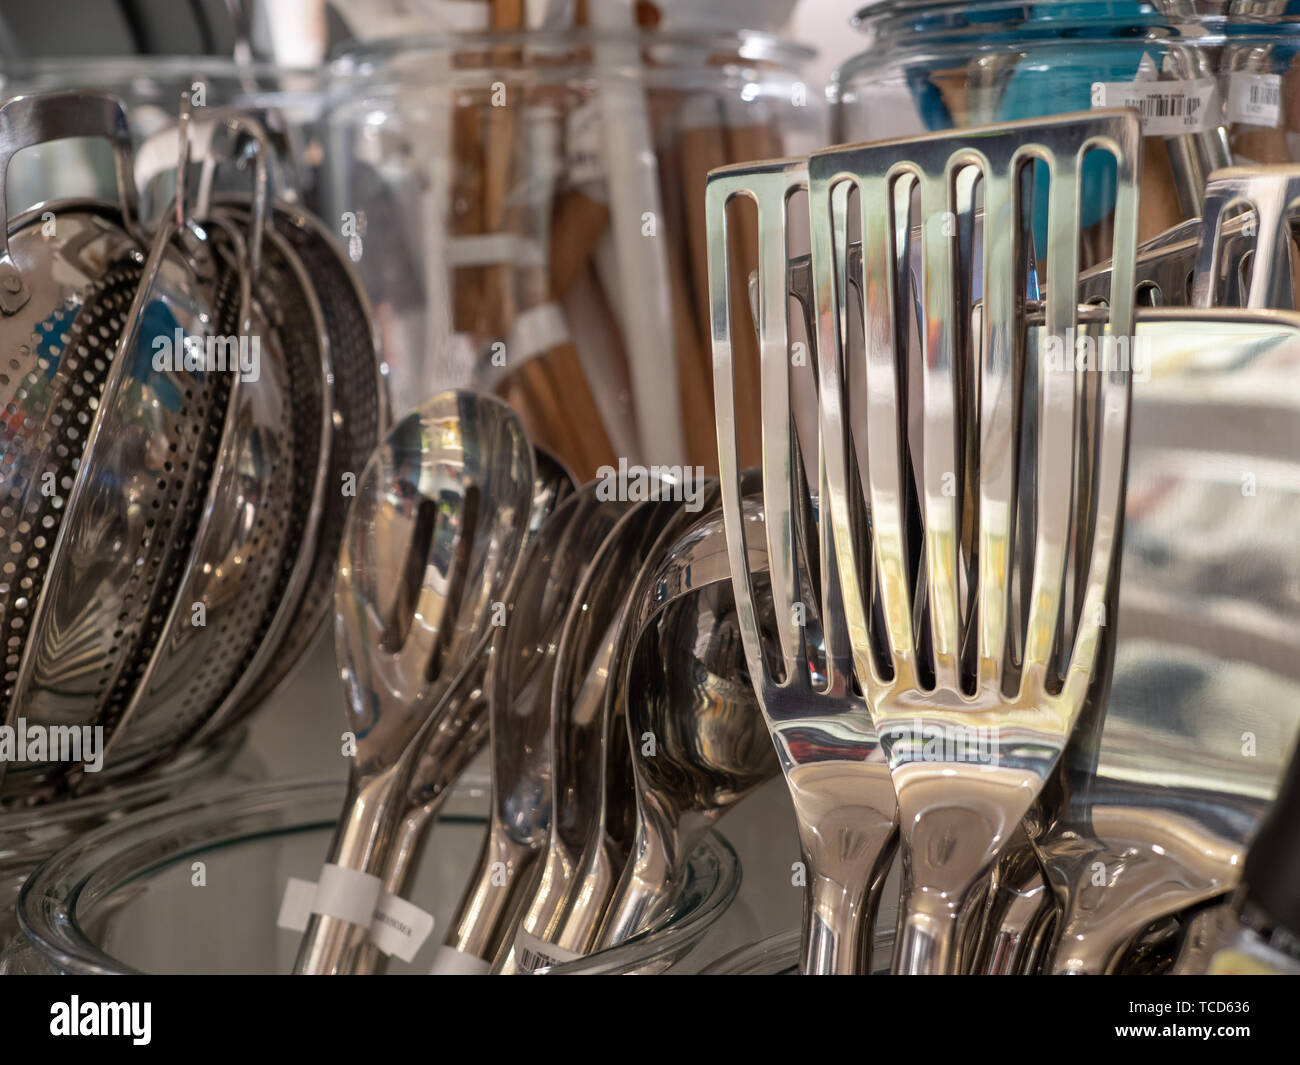 Chrome, metal fish spatula on display on rack with other utensils Stock Photo